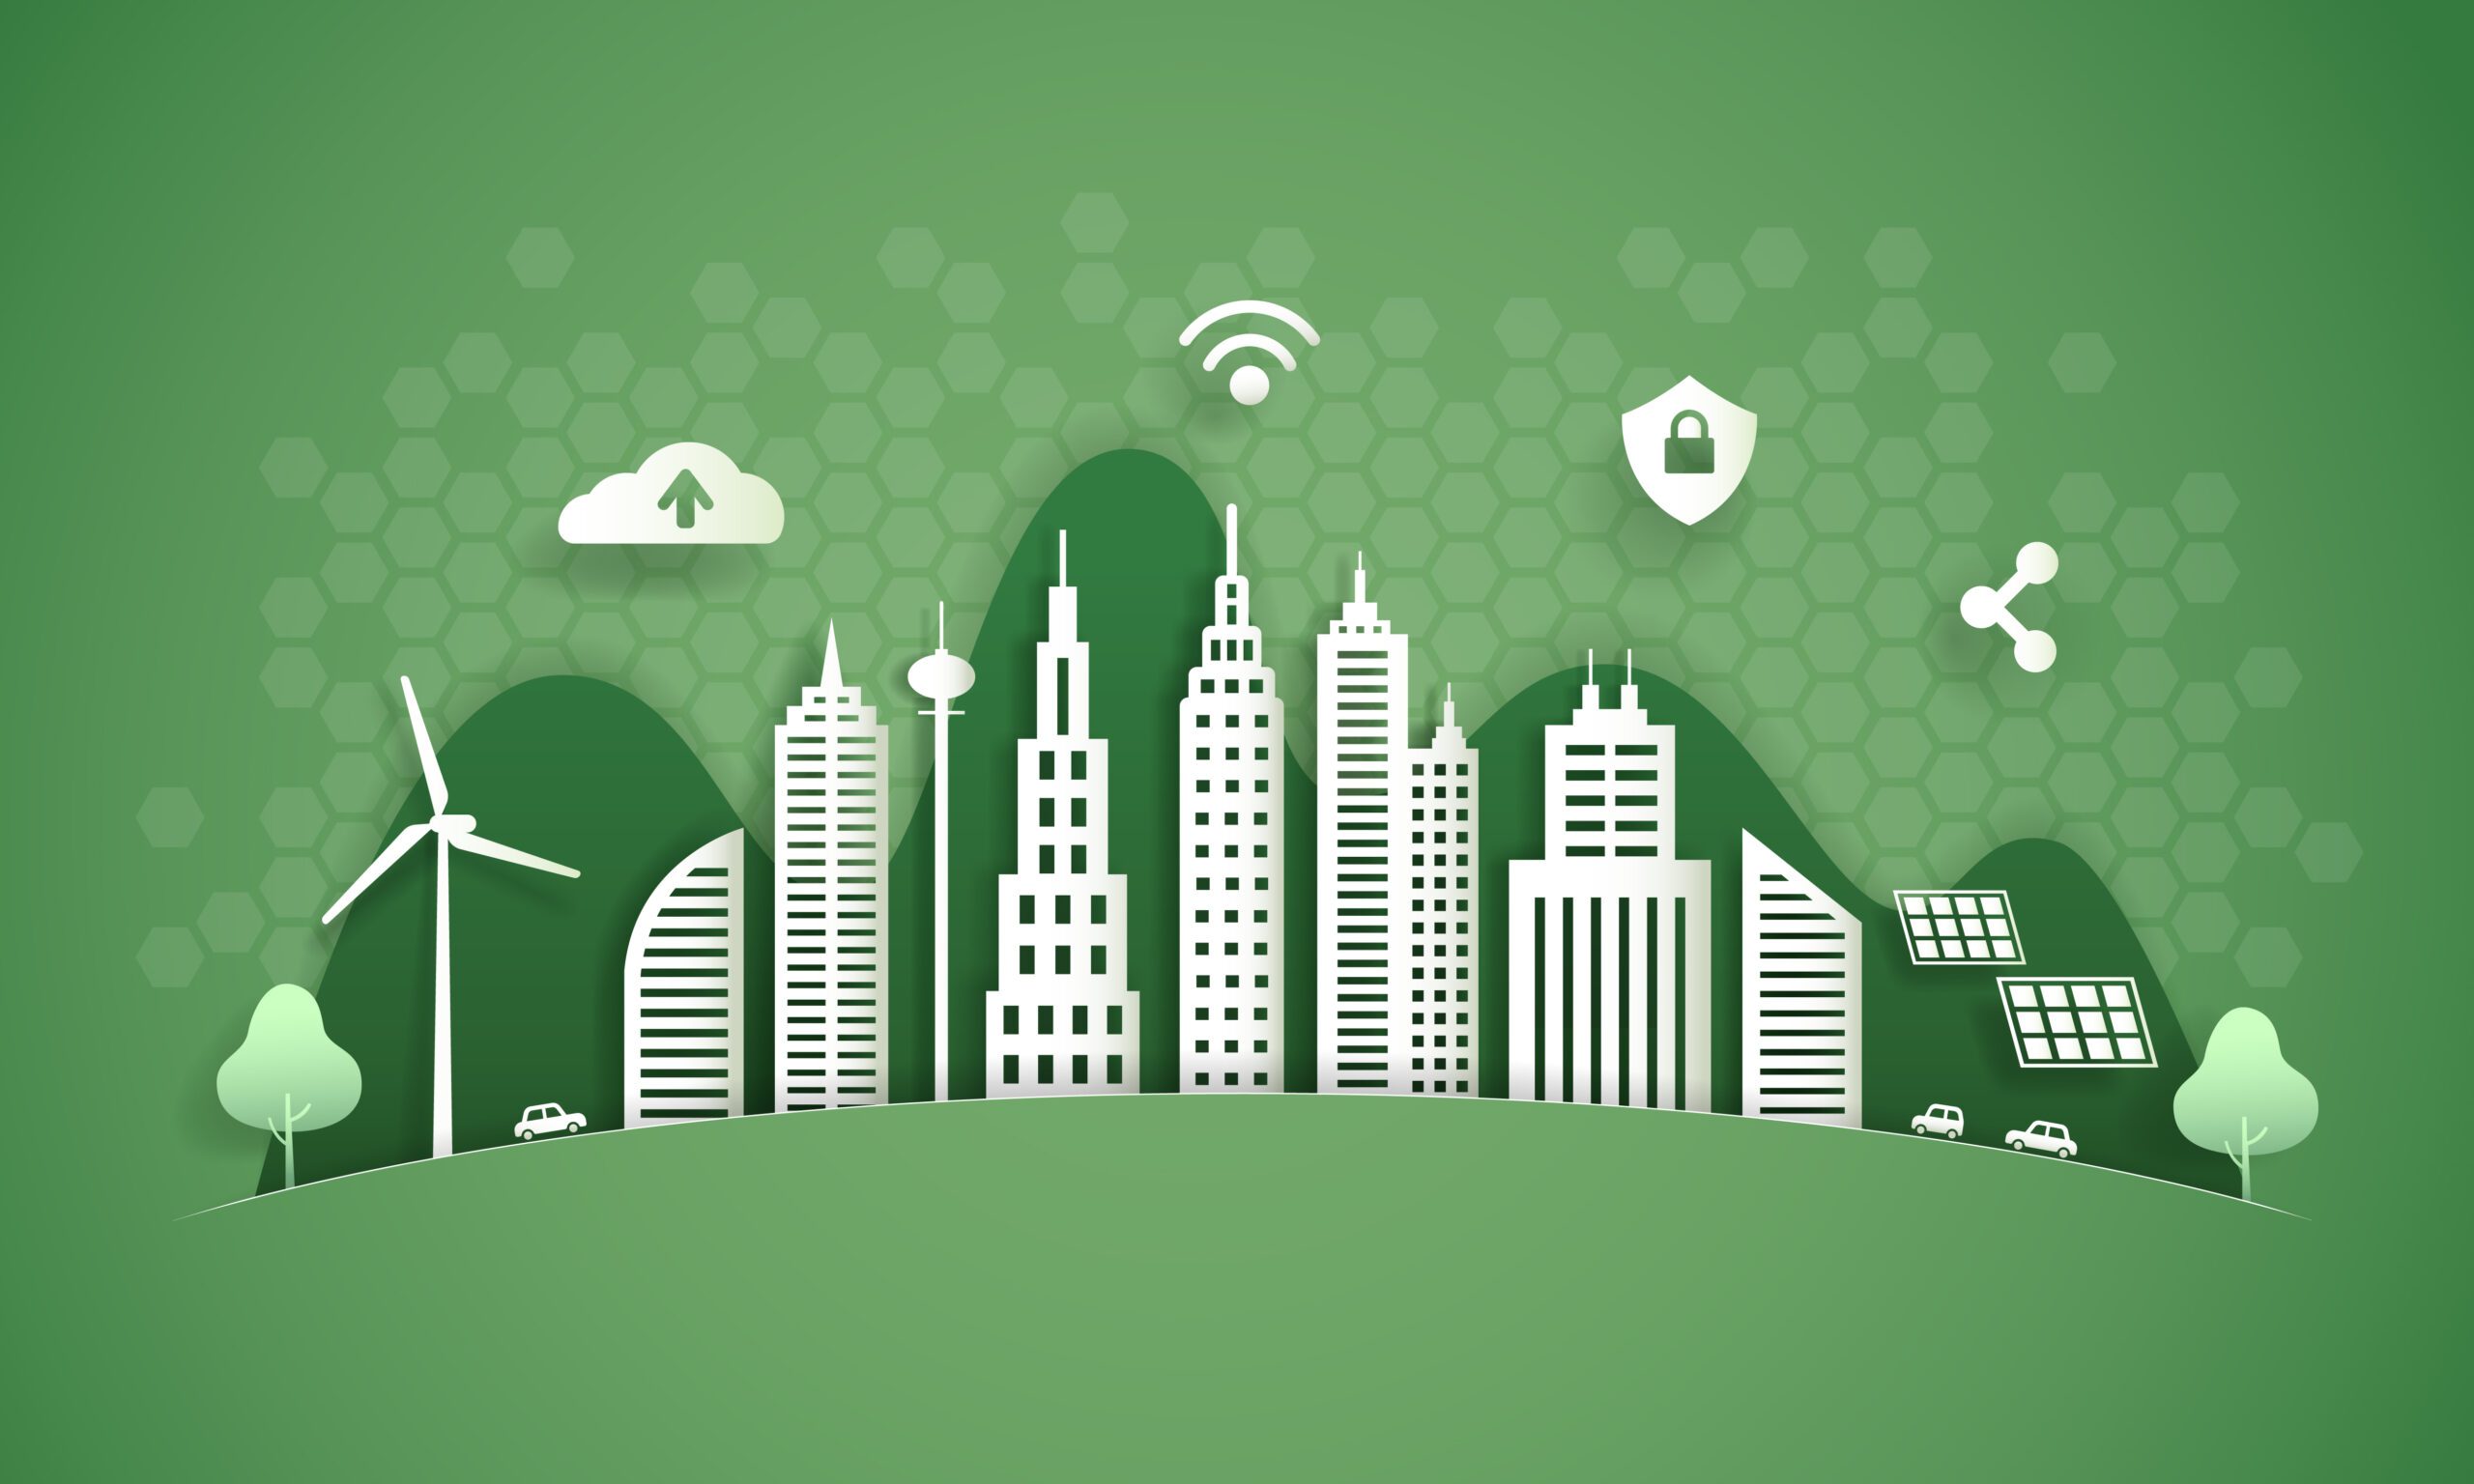 "Smart City: Transforming Urban Living with Technology"